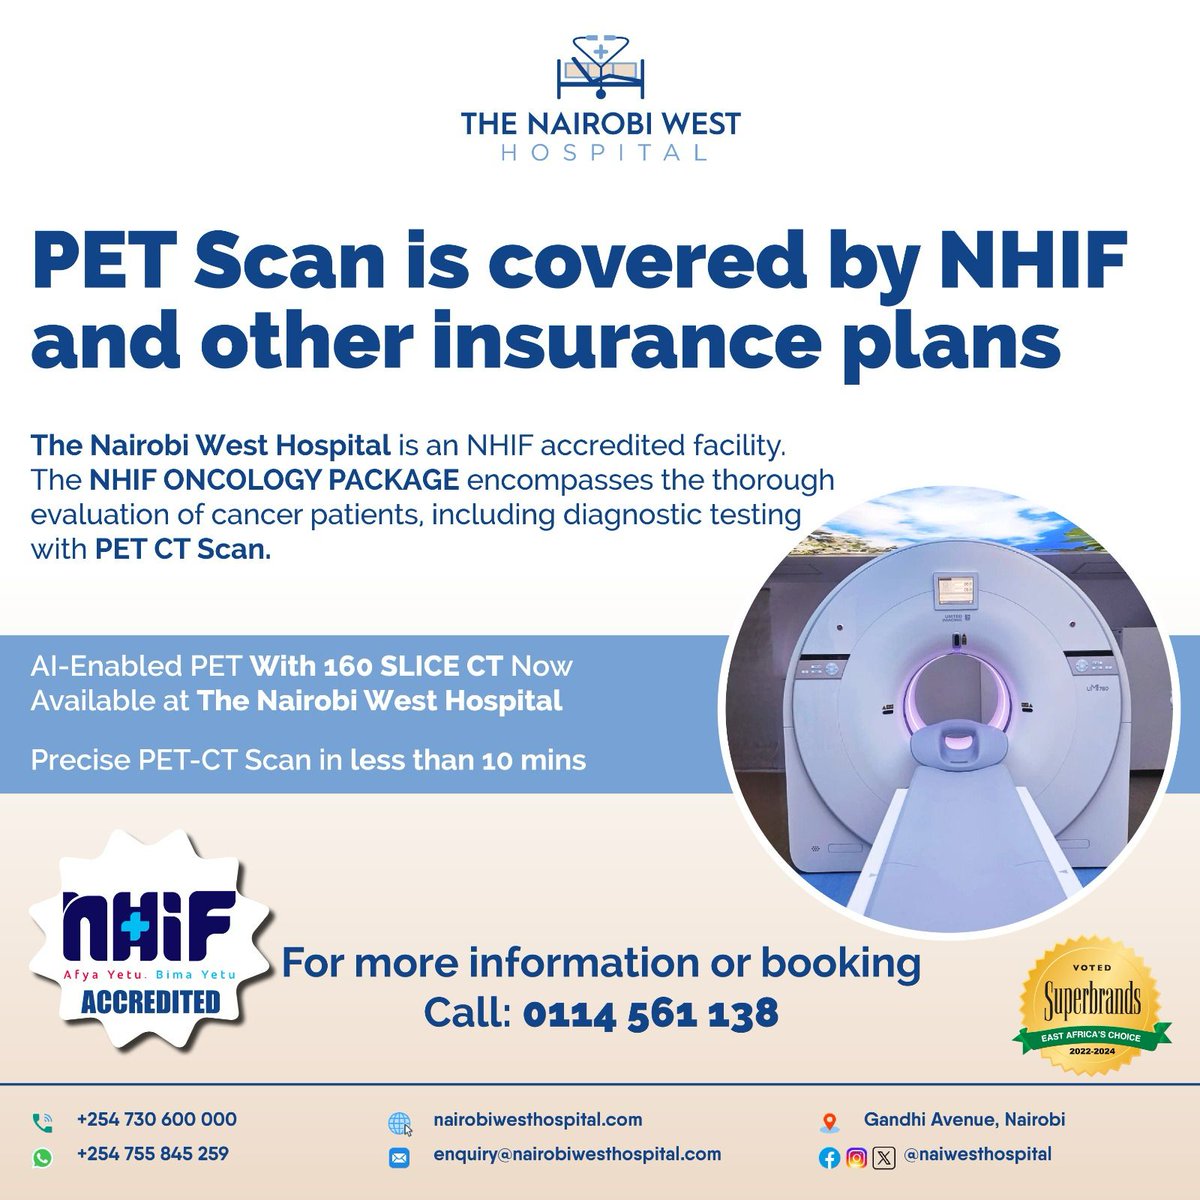 The PET scan, a component of the PET-CT, is utilized to detect various medical conditions, with a primary focus on cancer diagnosis. It can provide critical information about the disease's progression.

#NairobiWestPETScan
AI Enabled PetScan